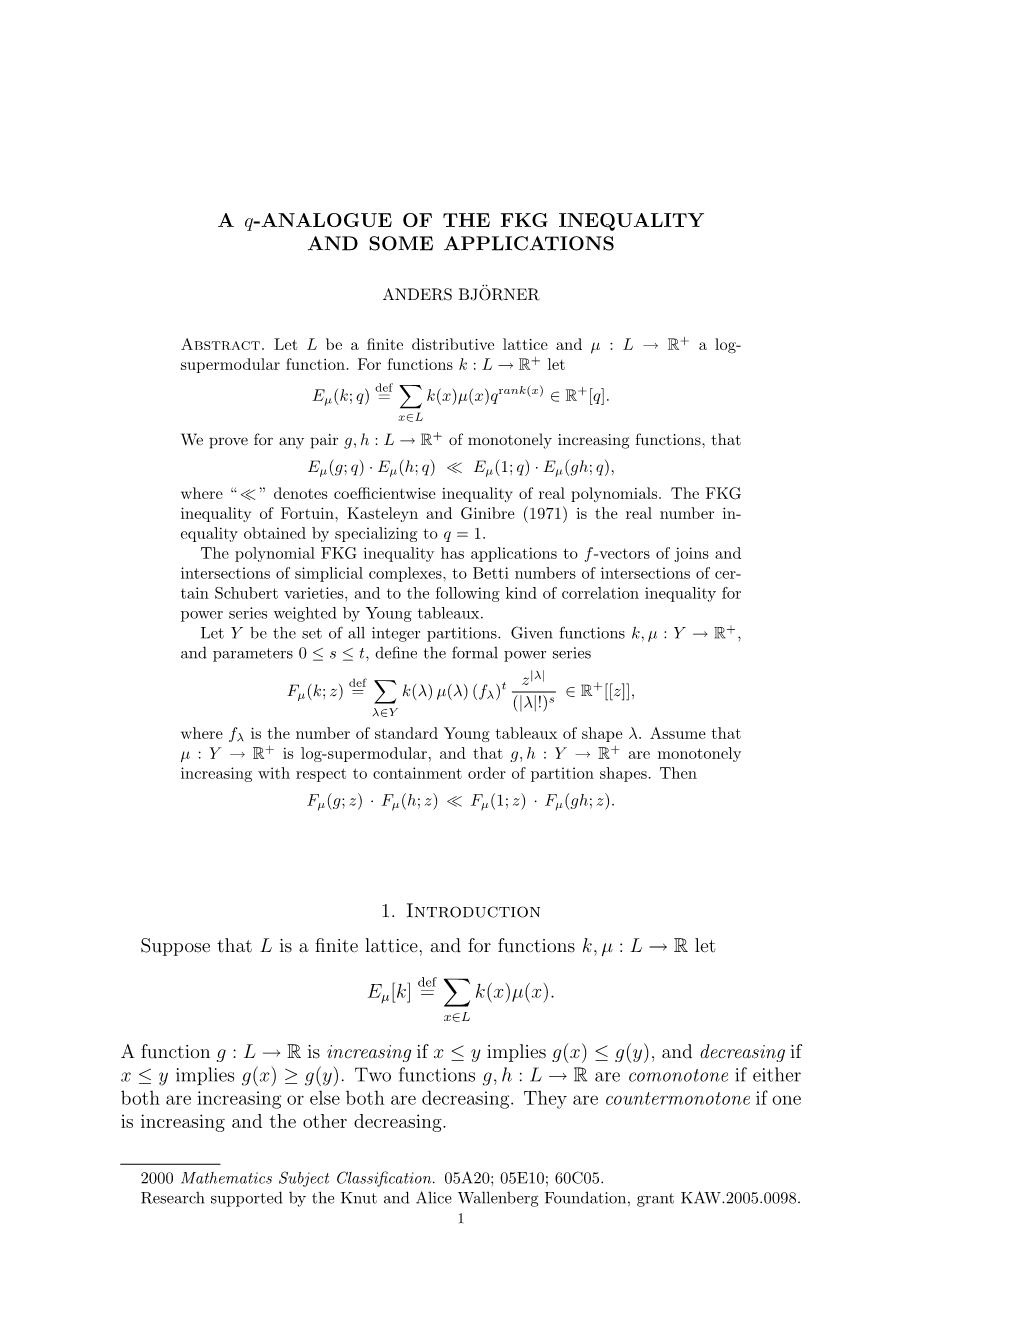 A Q-ANALOGUE of the FKG INEQUALITY and SOME APPLICATIONS